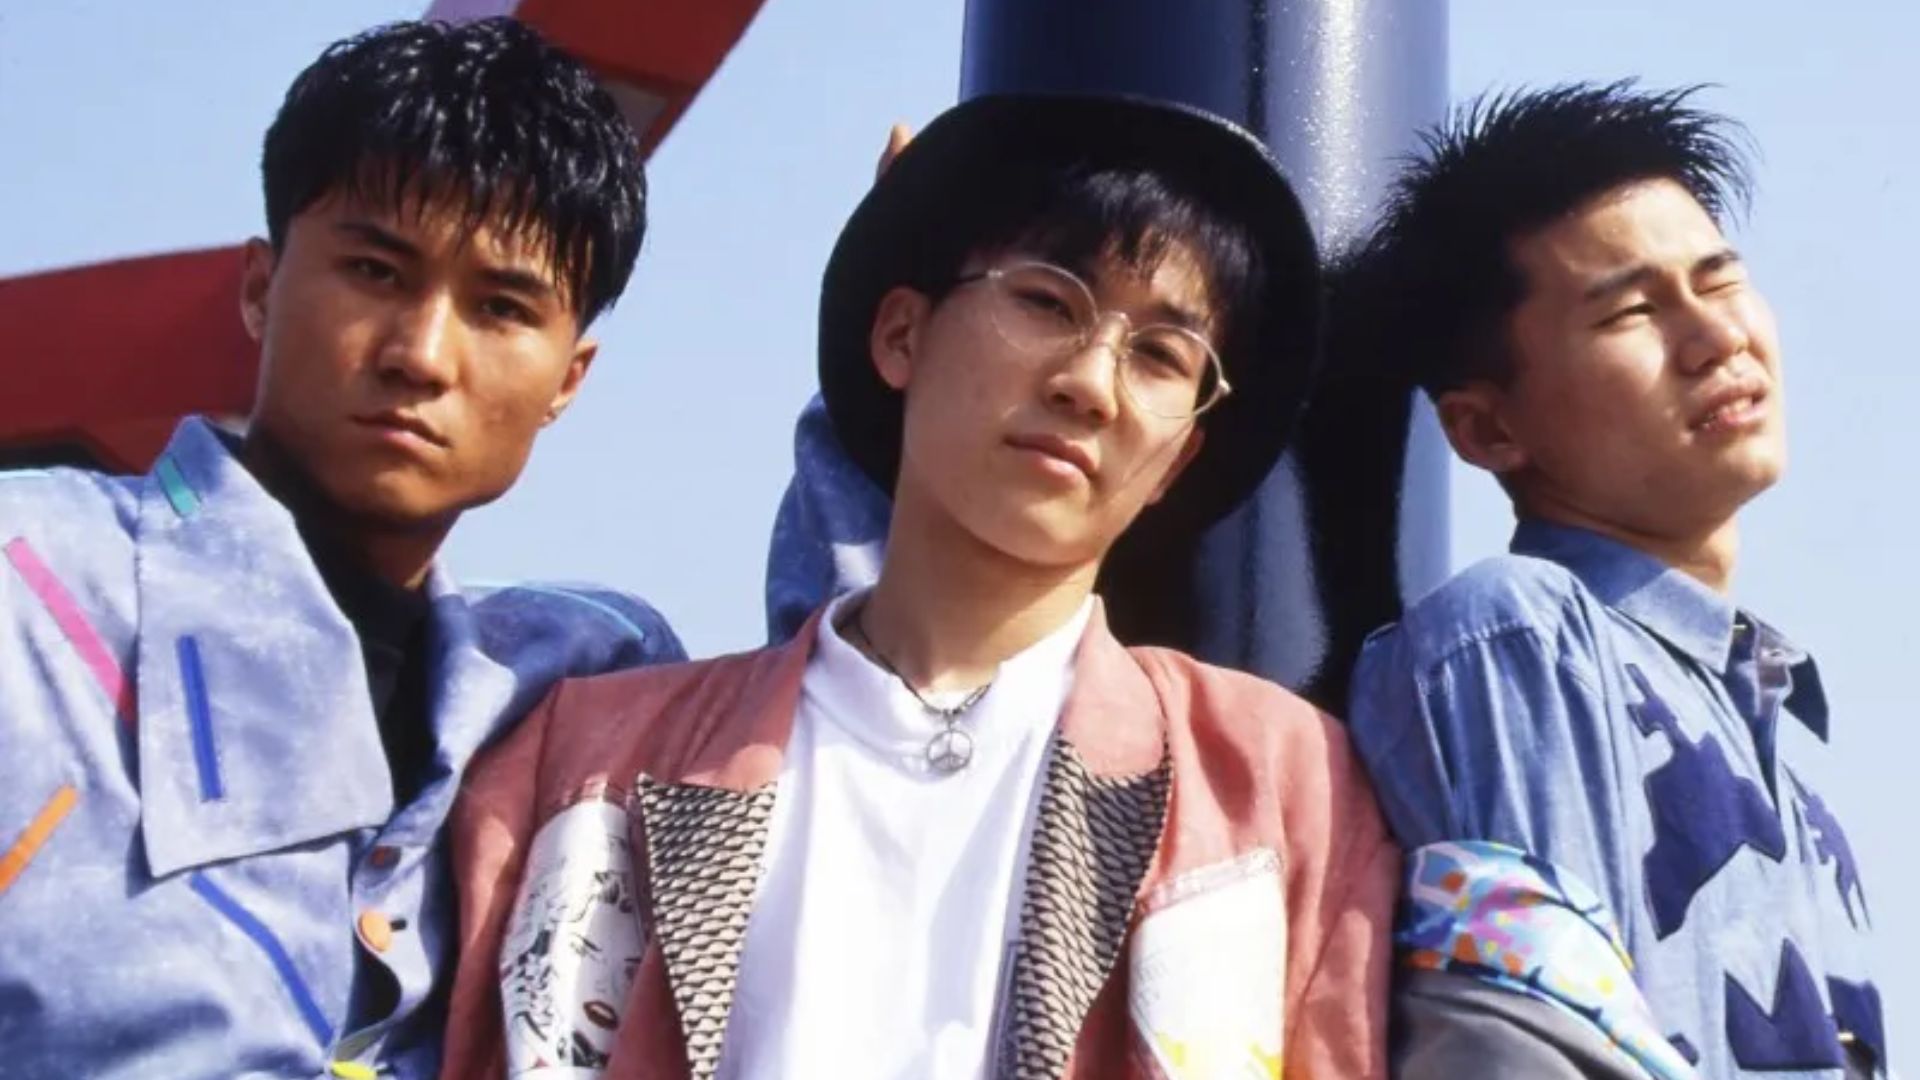 Seo Taiji and Boys: All About the Music Trio!